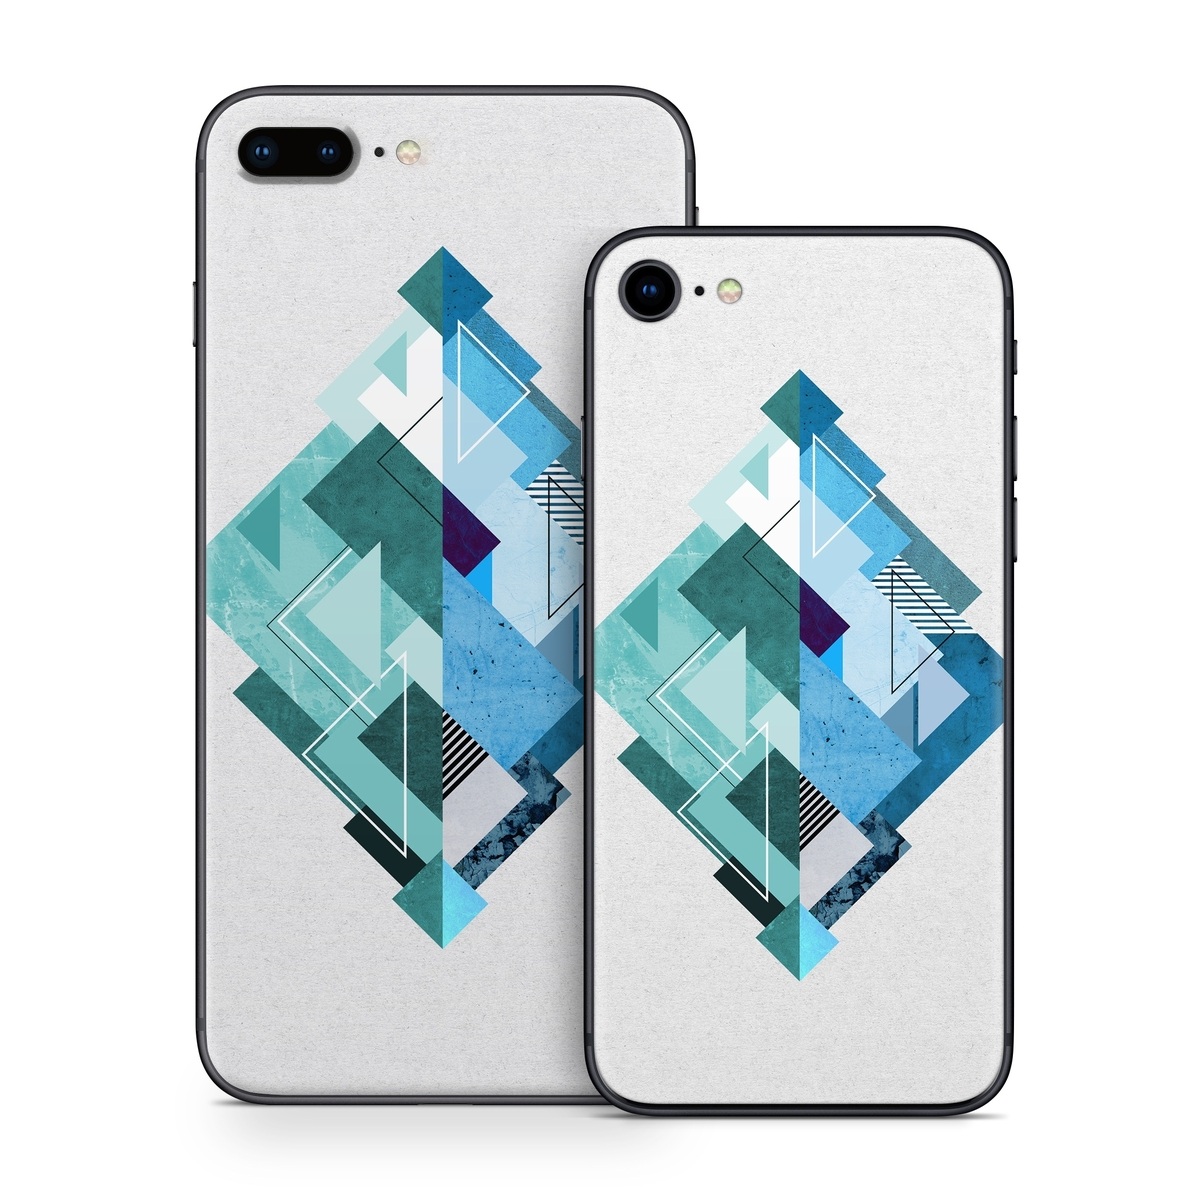 iPhone 8 Series Skin design of Blue, Turquoise, Illustration, Graphic design, Design, Line, Logo, Triangle, Graphics, with gray, blue, purple colors